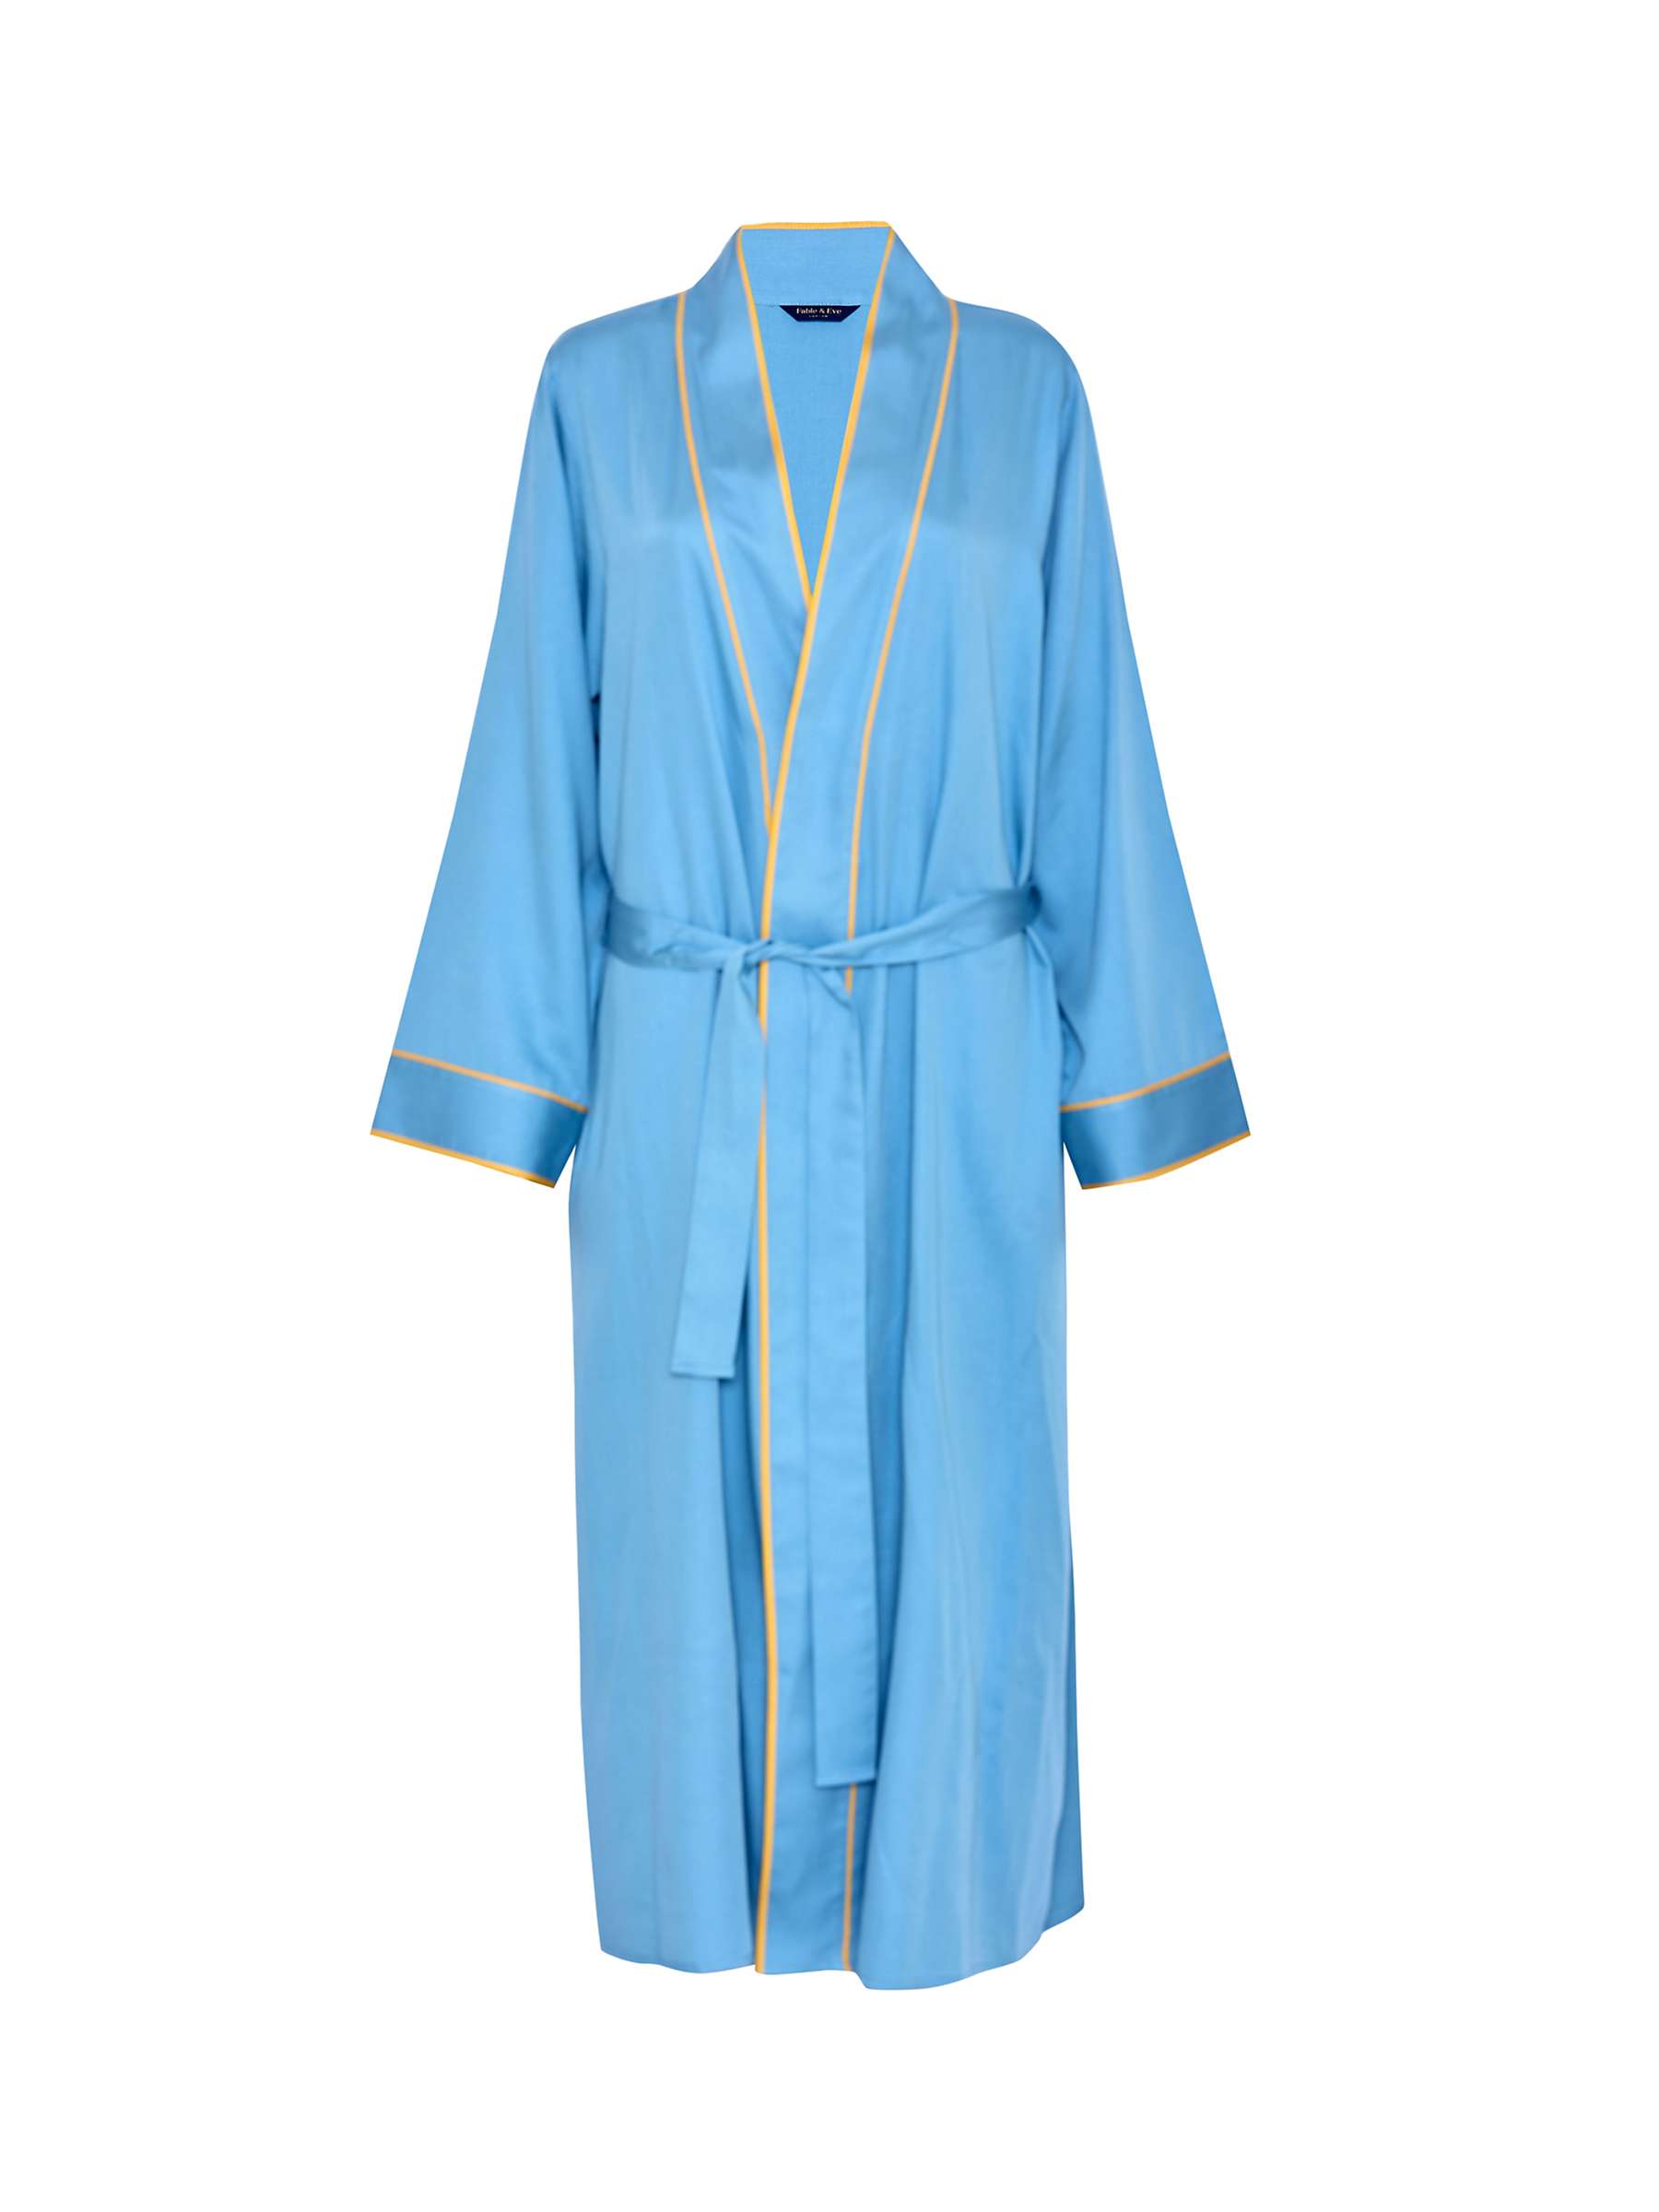 Buy Fable & Eve Greenwich Long Sleeve Dressing Gown, Cerulean Blue Online at johnlewis.com